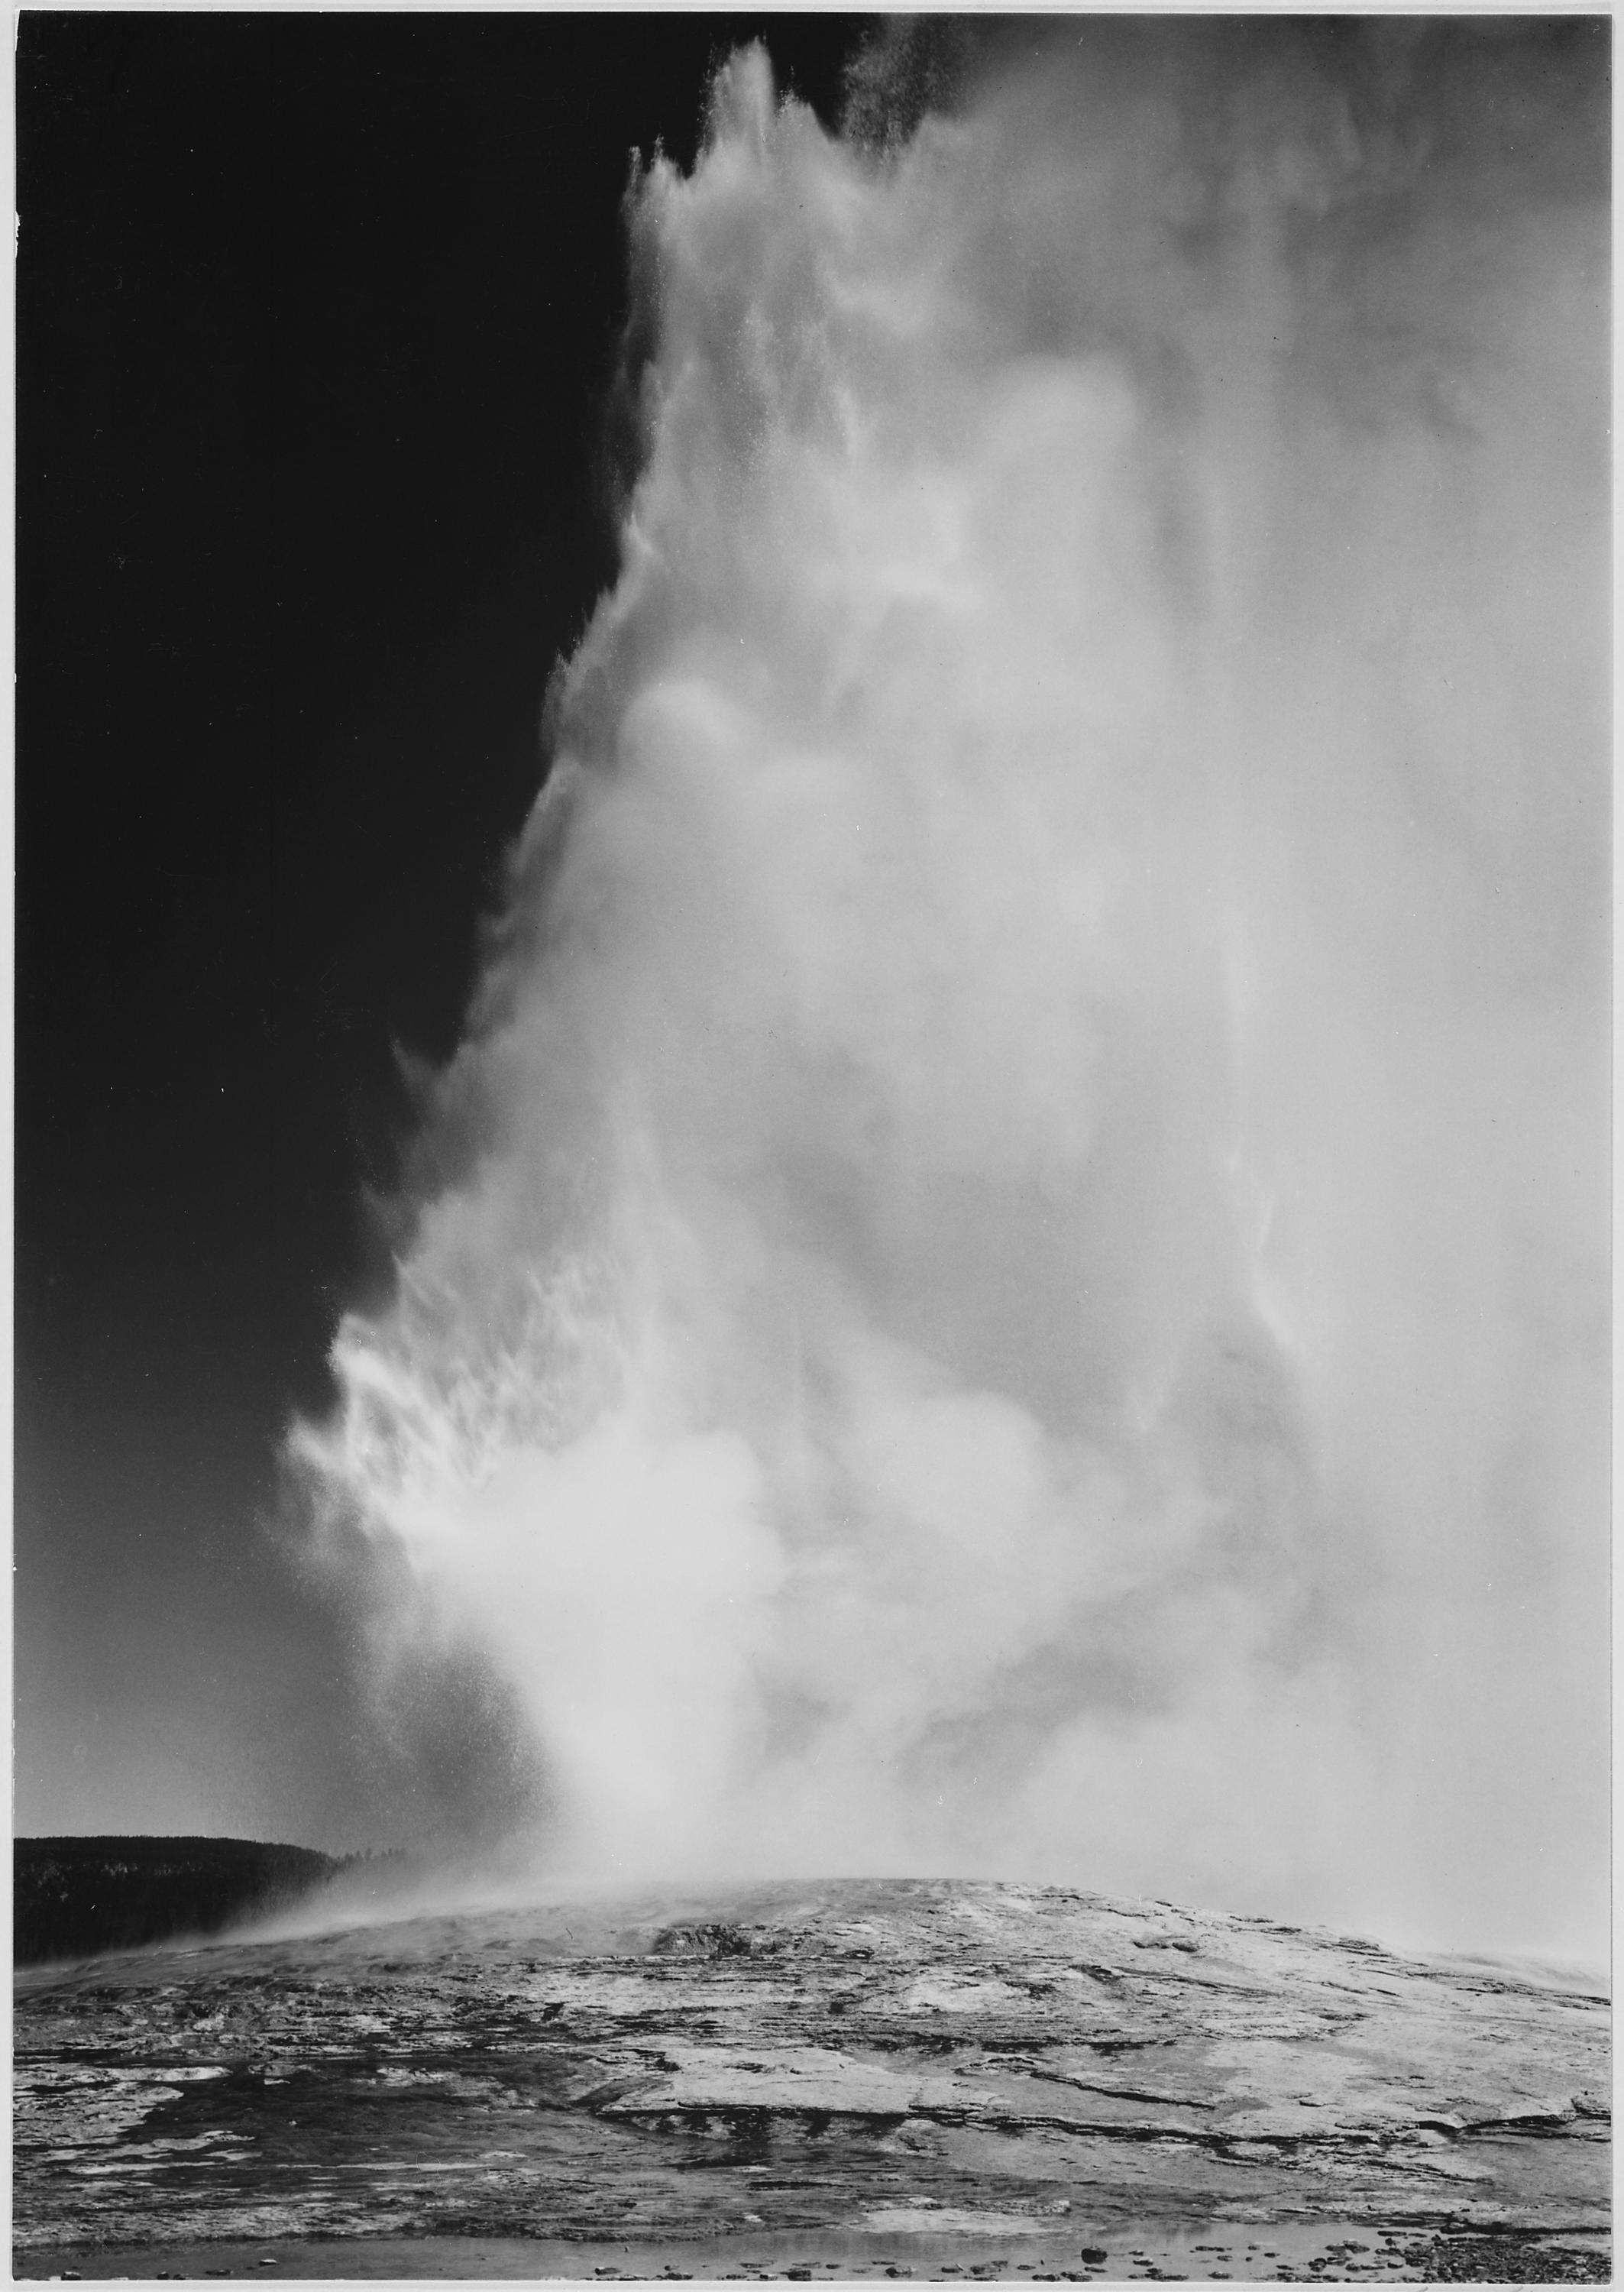 Ansel Adams - National Archives 79-AA-T26